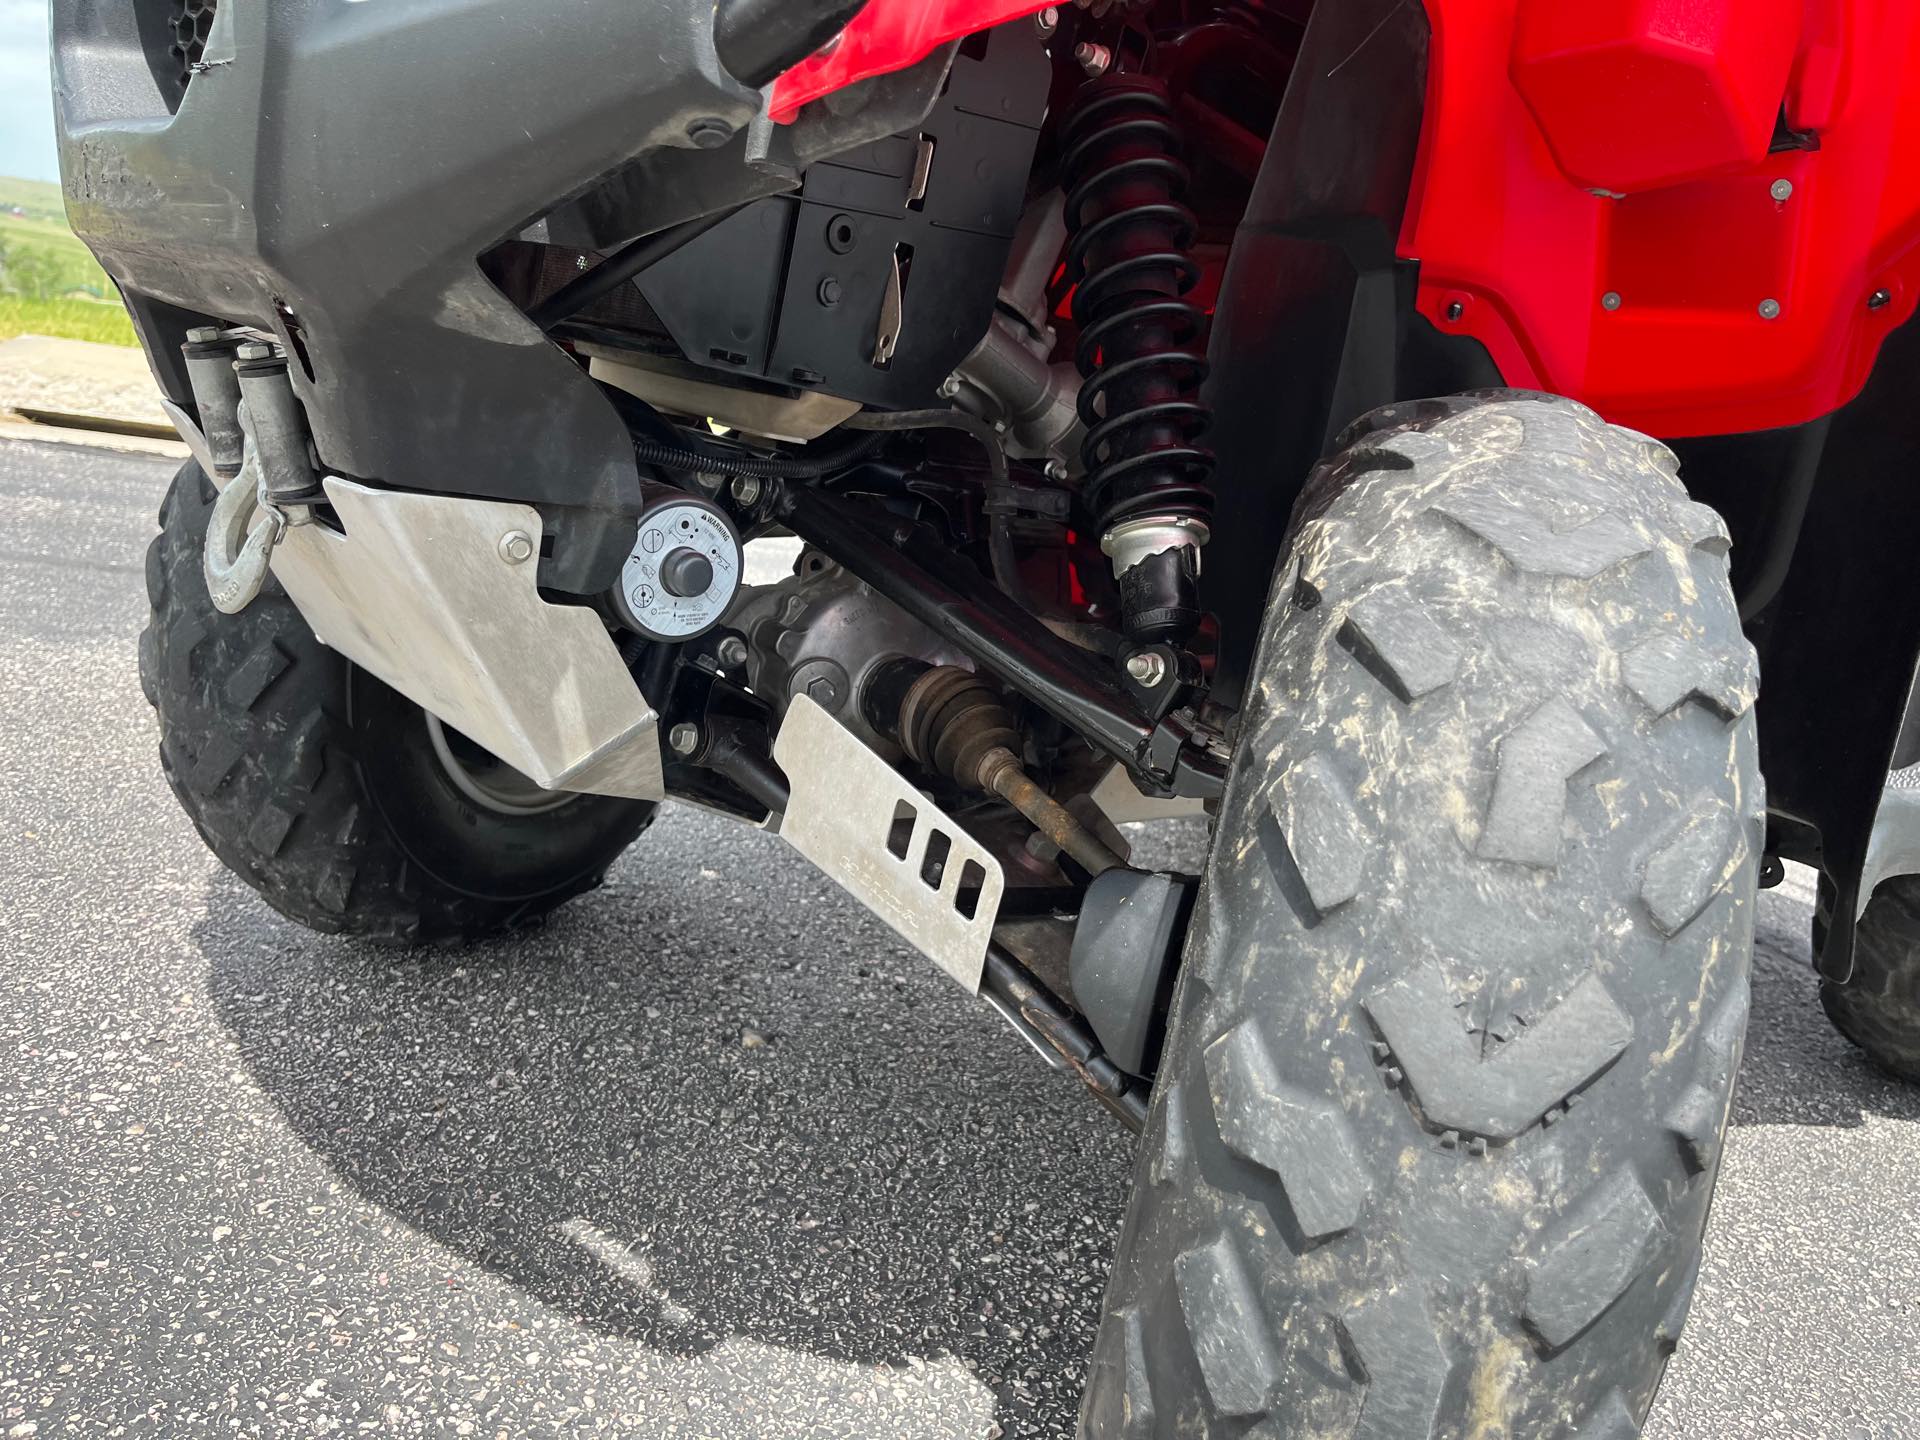 2012 Honda FourTrax Foreman 4x4 With Power Steering at Mount Rushmore Motorsports